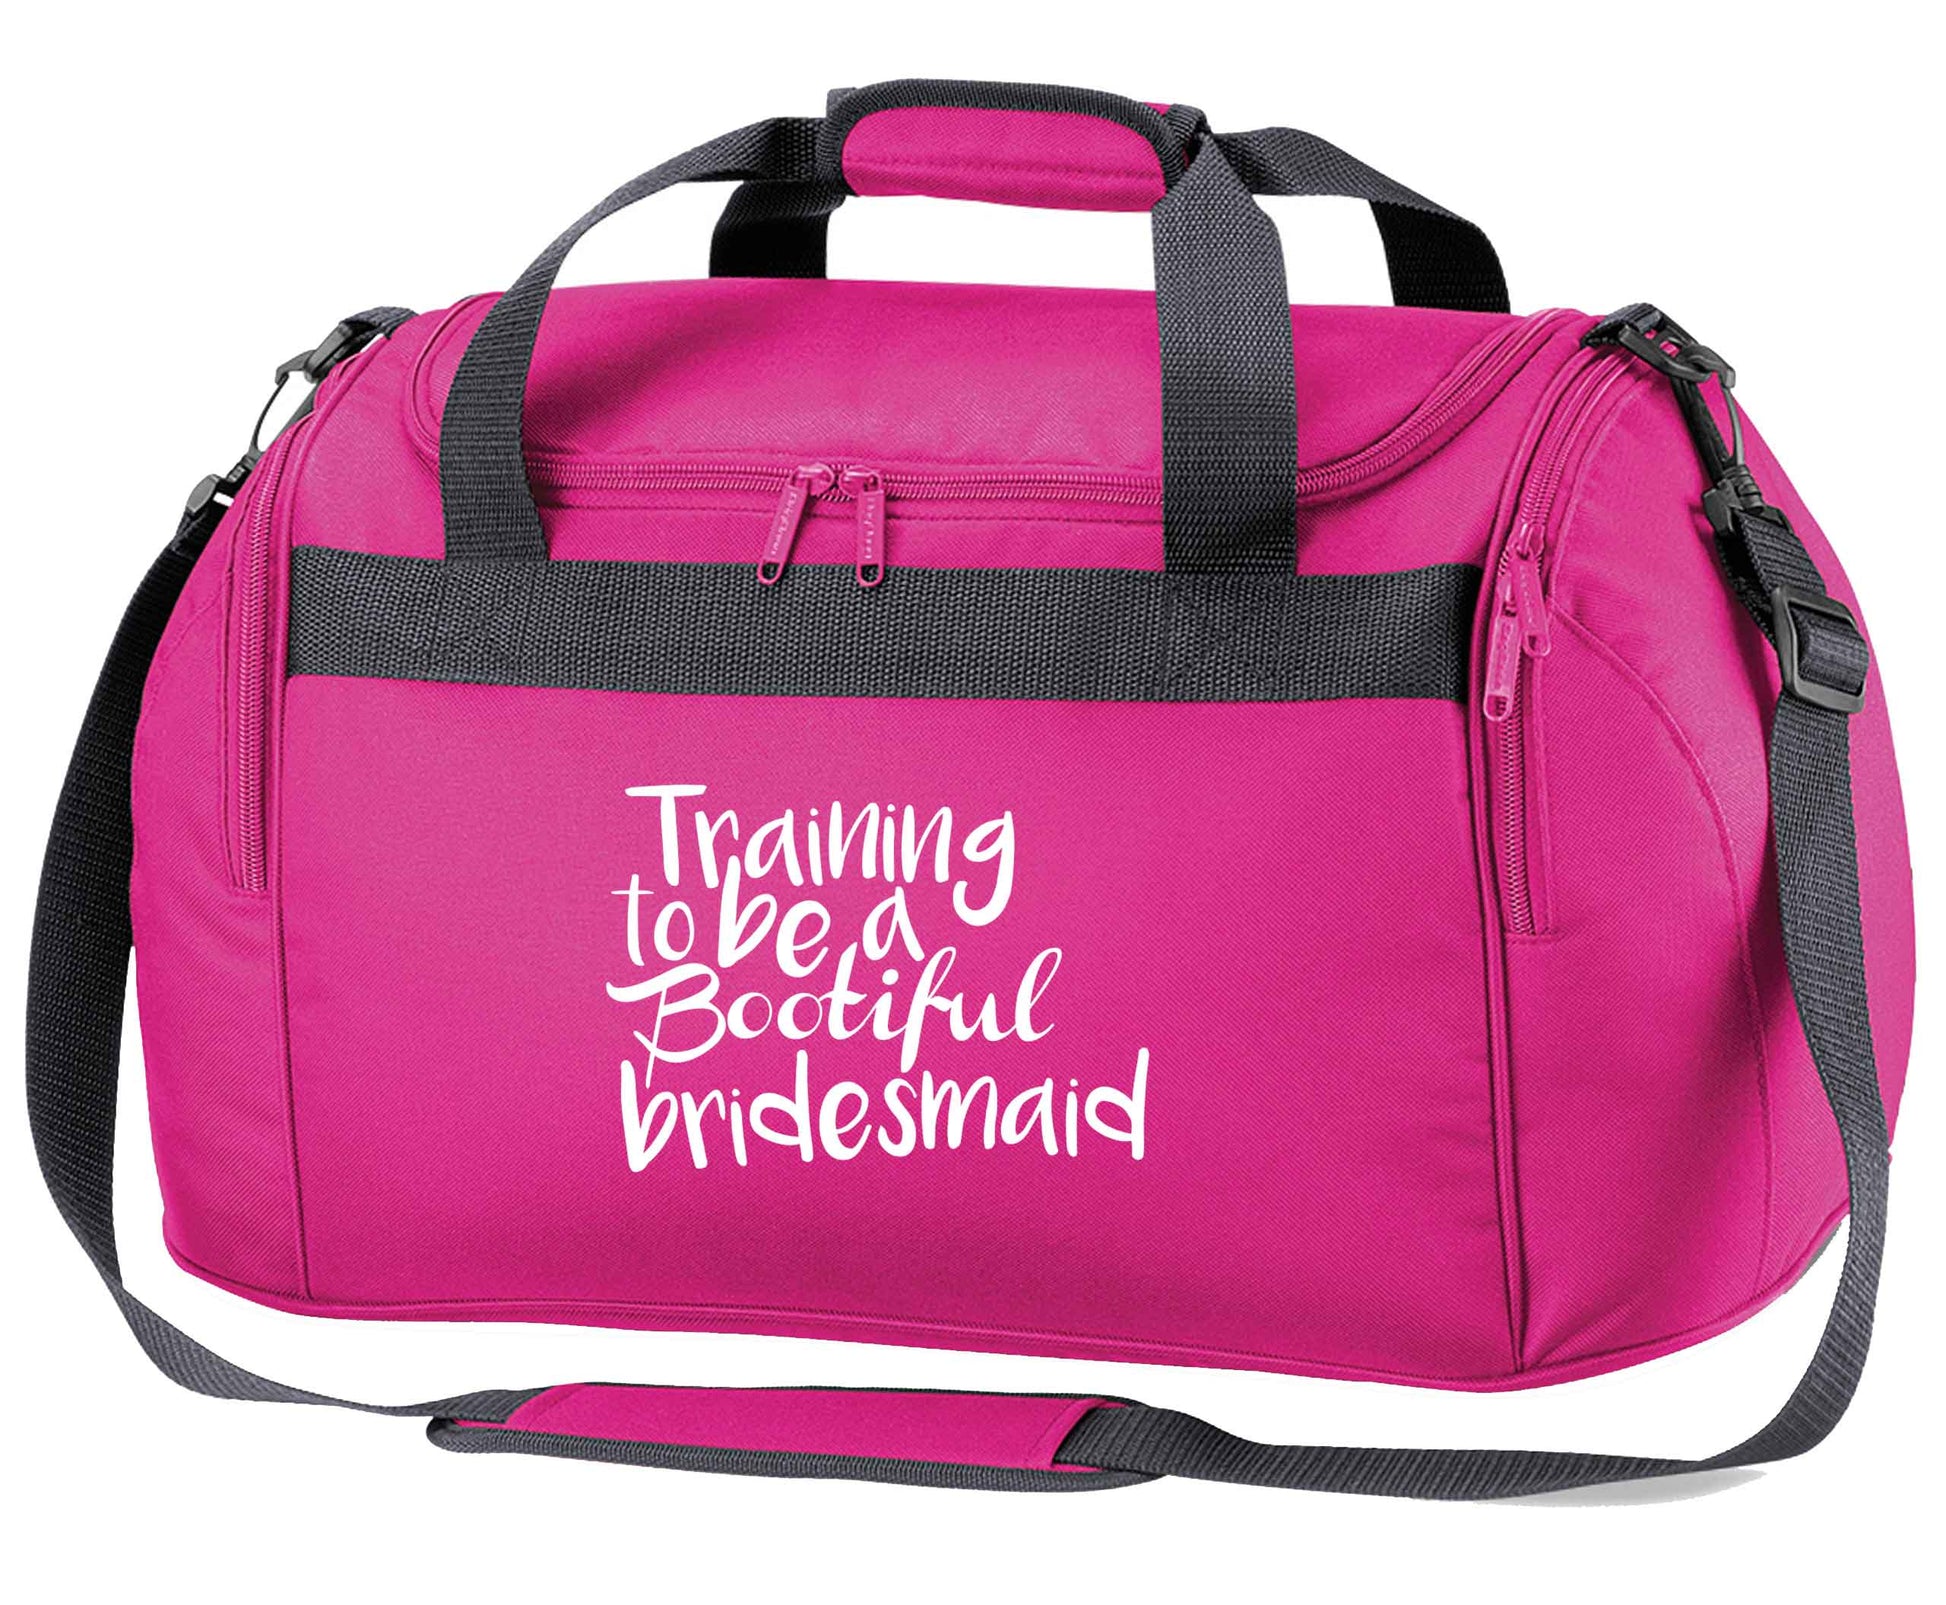 Get motivated and get fit for your big day! Our workout quotes and designs will get you ready to sweat! Perfect for any bride, groom or bridesmaid to be!  pink holdall / duffel bag